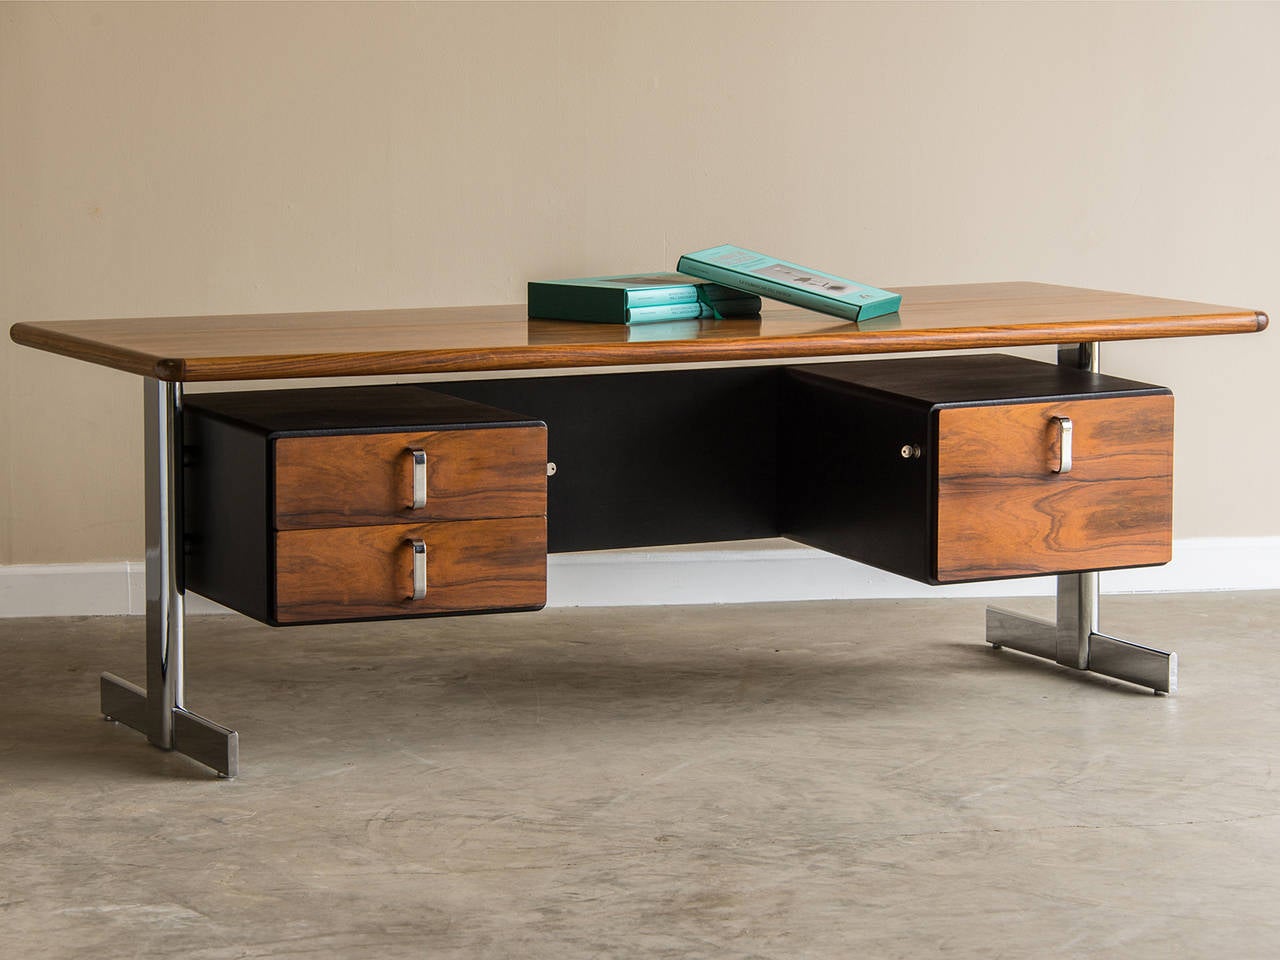 Receive our new selections direct from 1stdibs by email each week. Please click Follow Dealer below and see them first!

This vintage American desk circa 1973 was a special series for Knoll Furniture designed by Warren Platner that incorporated